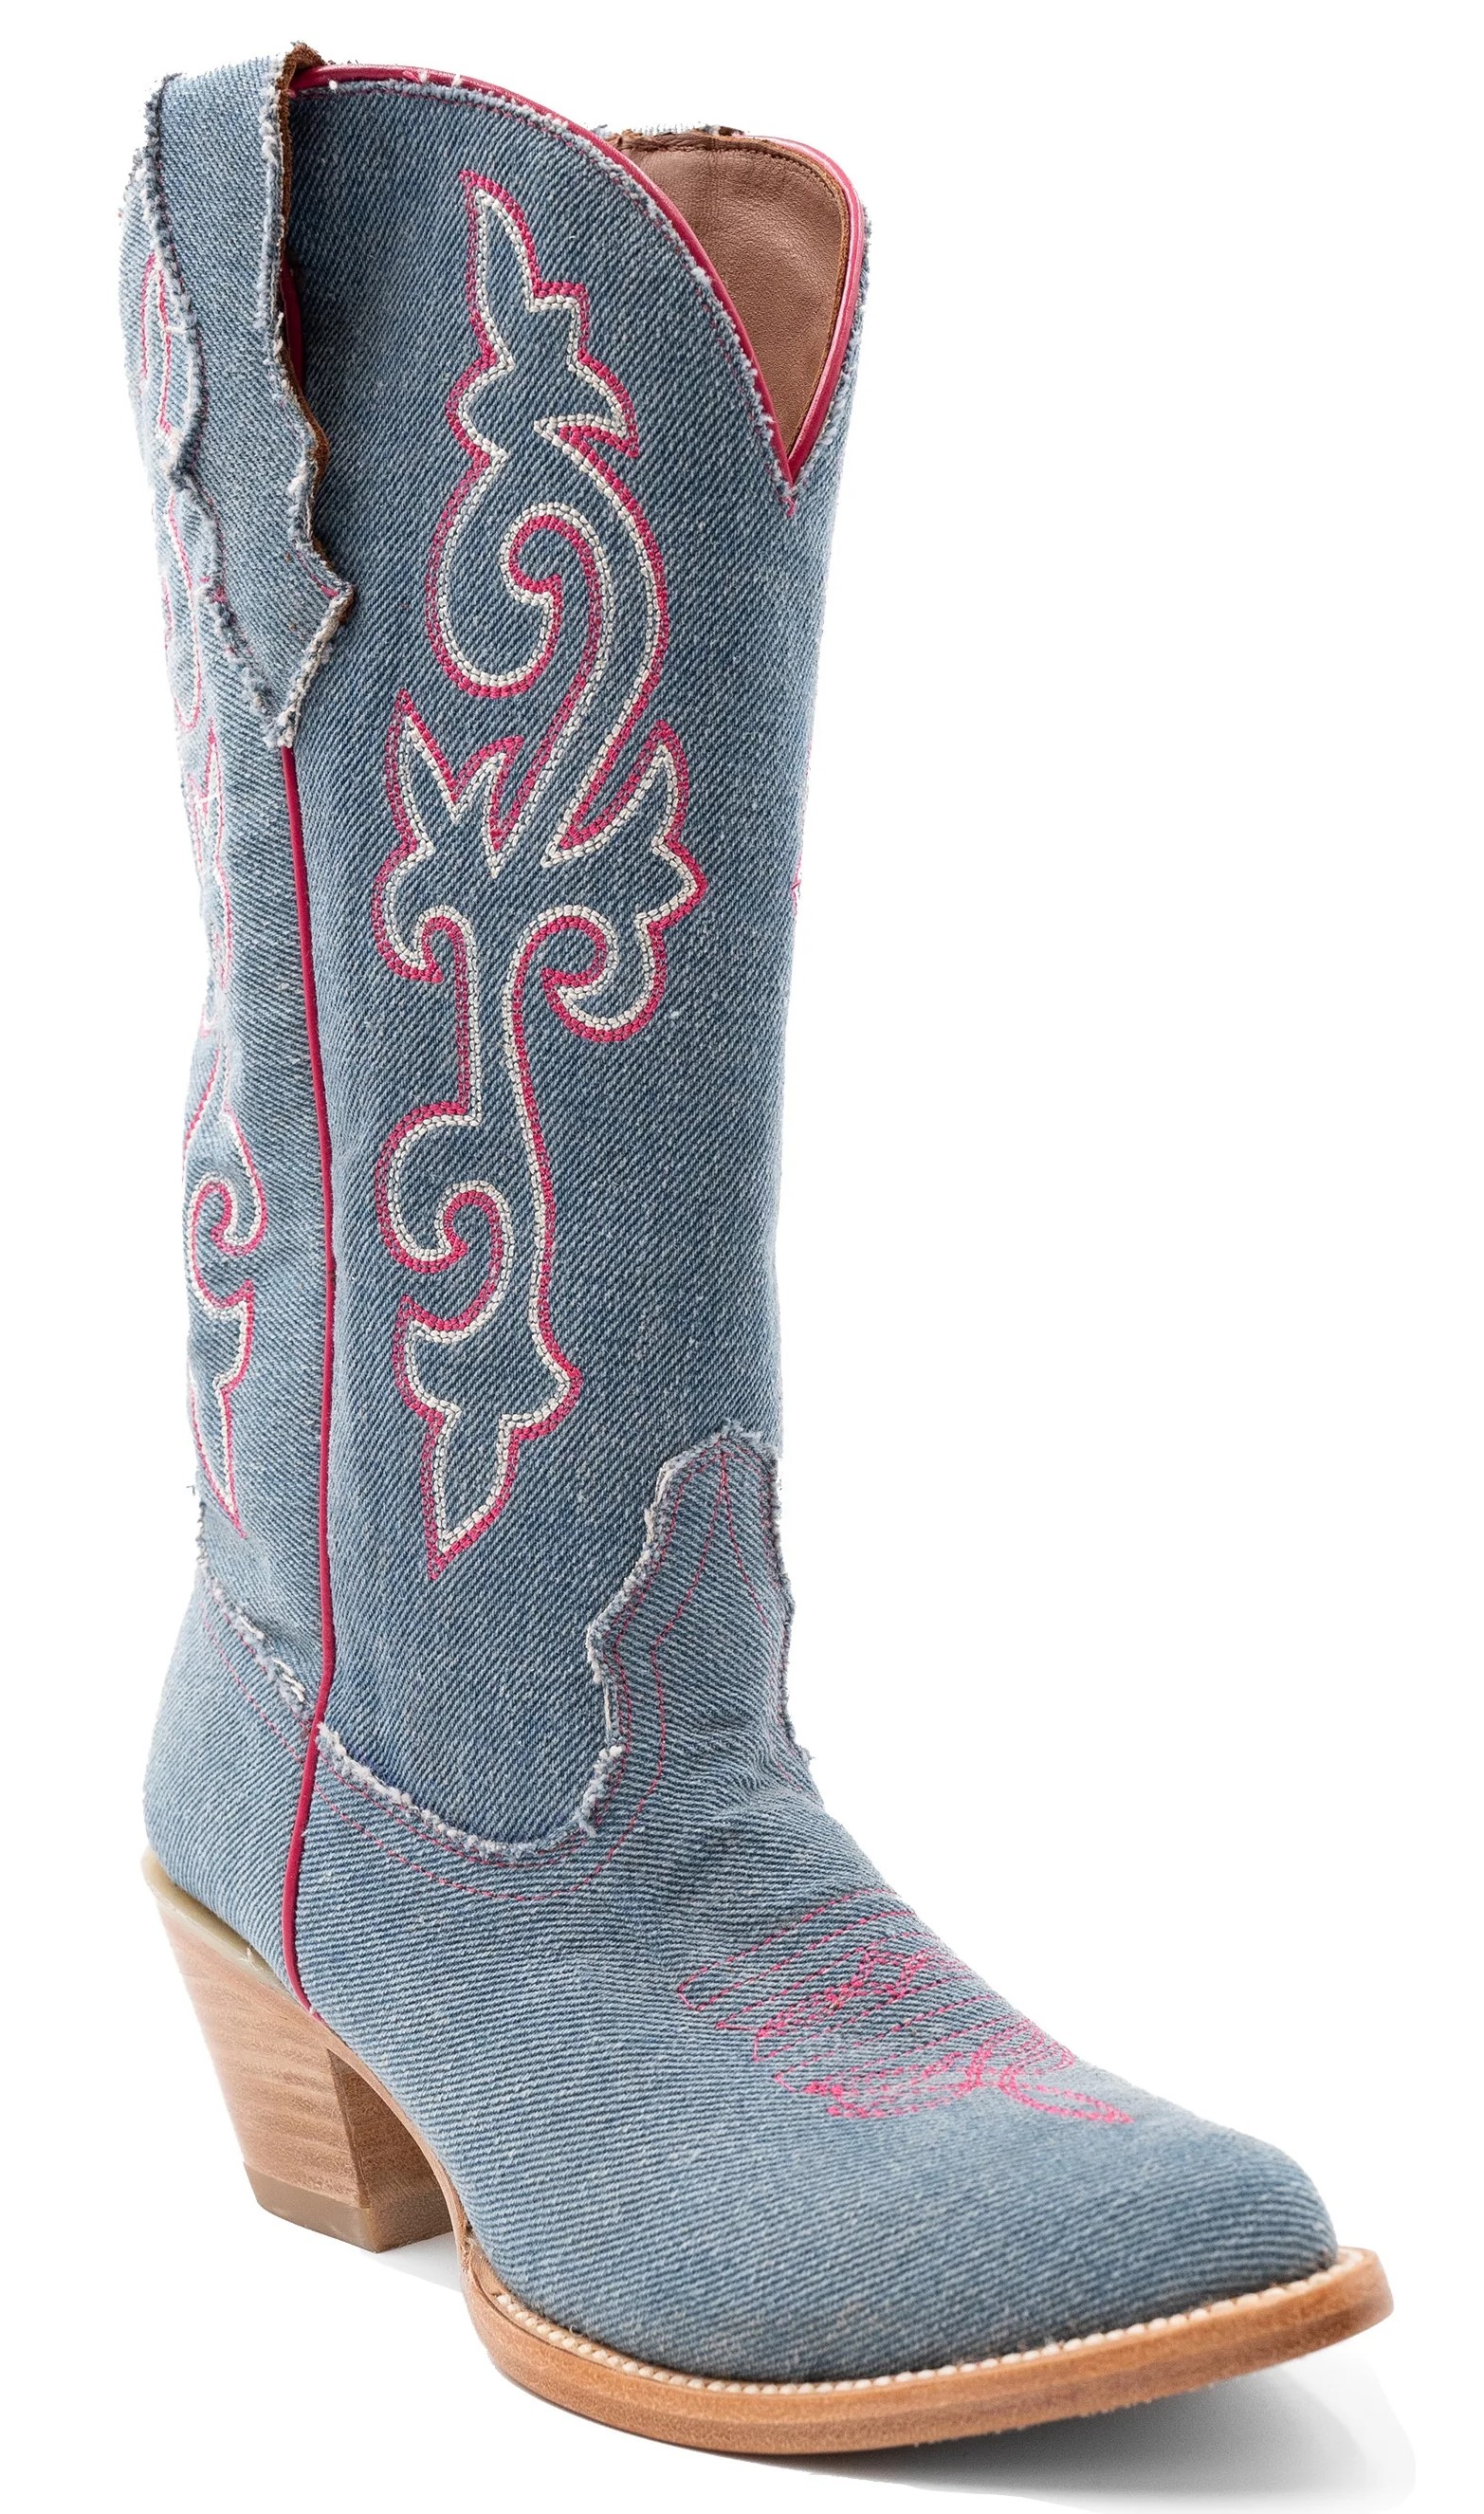 Ferrini Ladies "Billie Jean" Dusty Blue Synthetic Jean Leather Snipped Toe Cowgirl Boots 85161-26